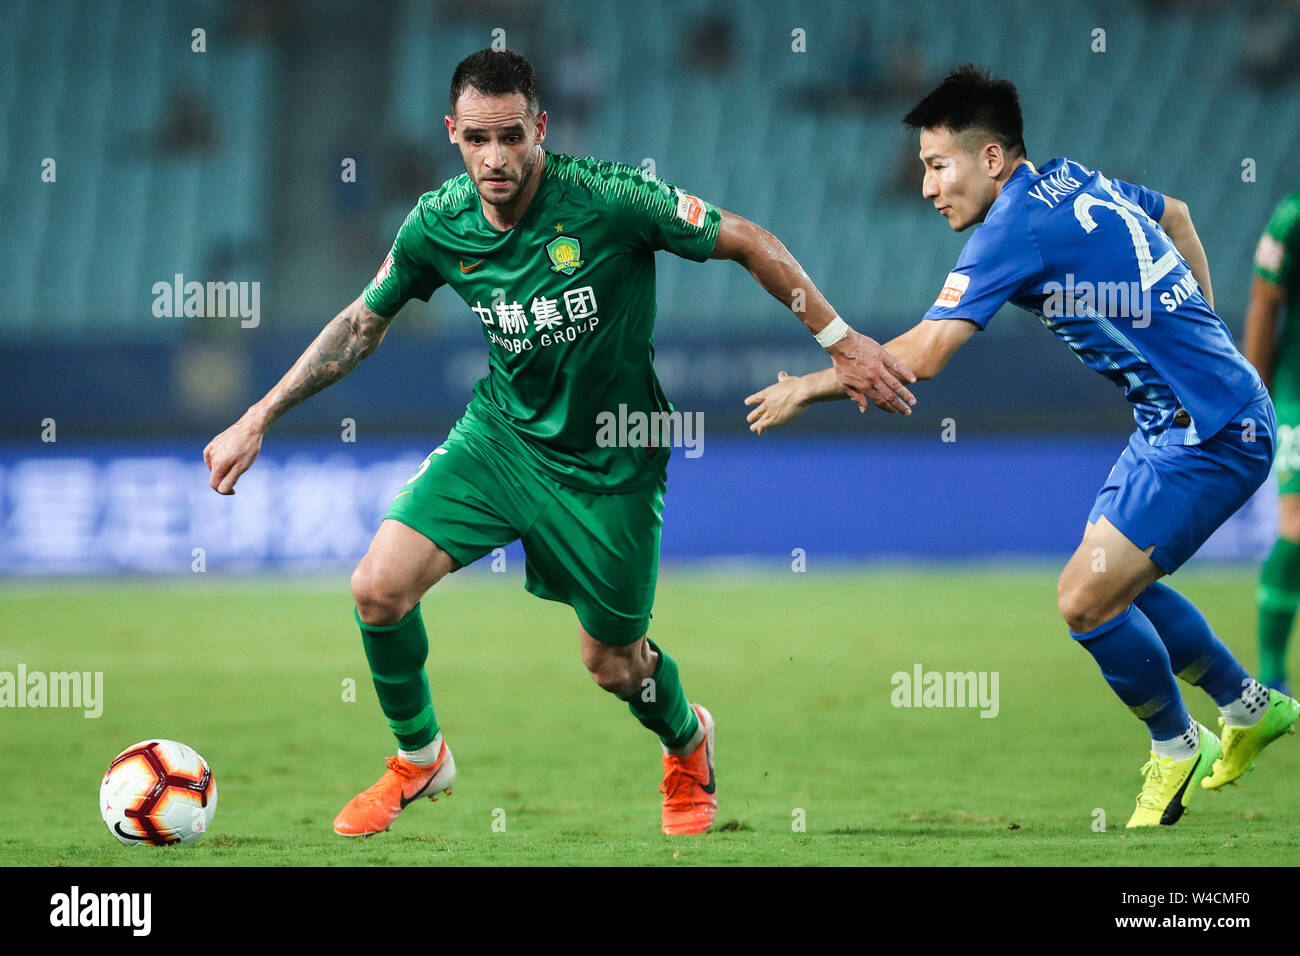 Brazilian football player Renato Soares de Oliveira Augusto, or simply Renato Augusto, left, of Beijing Sinobo Guoan F.C. keeps the ball during the 19th round of Chinese Football Association Super League (CSL) against Jiangsu Suning in Nanjing, east China’s Jiangsu province on 21 July 2019. Jiangsu Suning wins in the match with a 1-0. Stock Photo